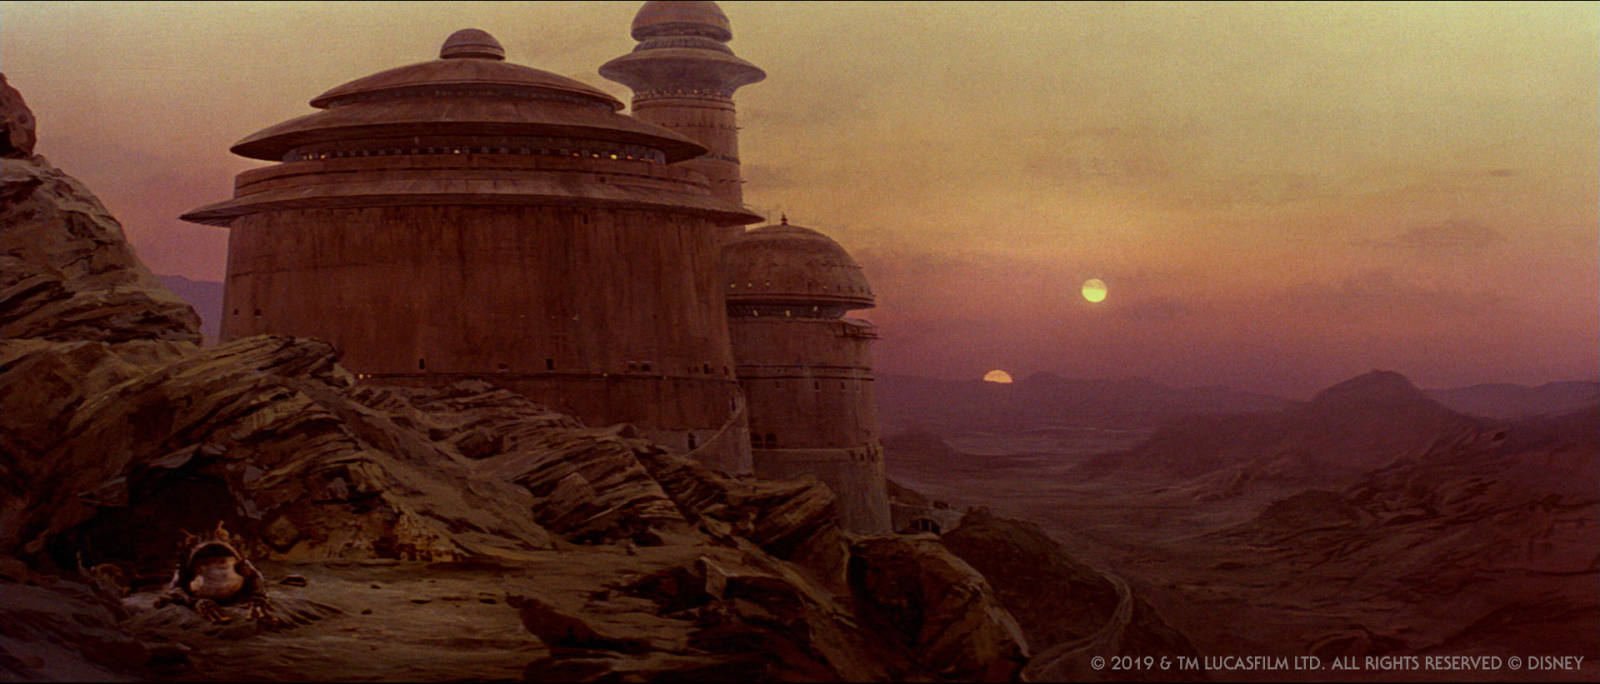 Jabba's Palace from Return of the Jedi